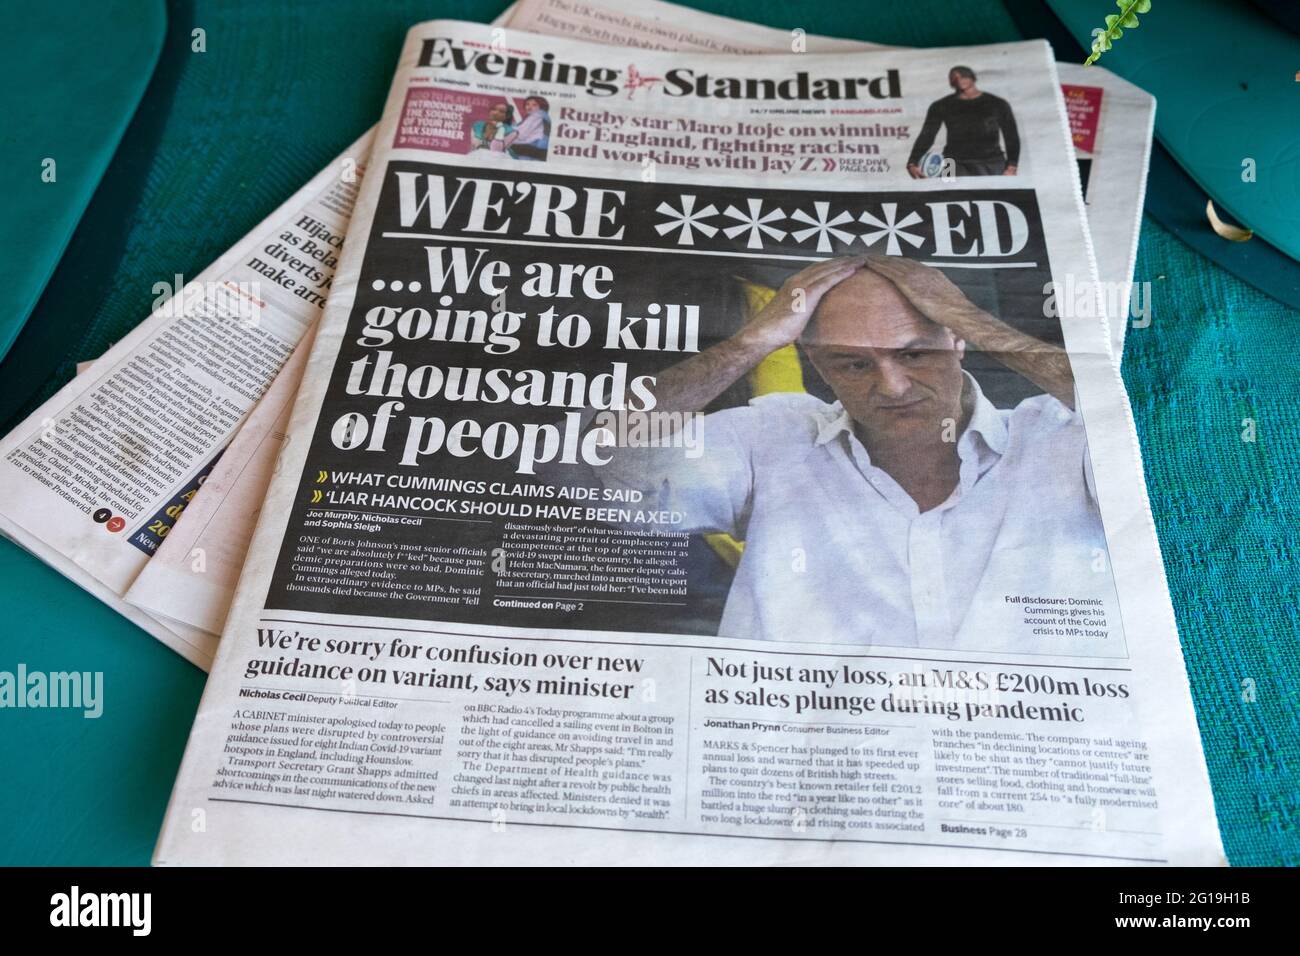 Dominic Cummings Evening Standard newspaper headline on front page We;re ****ed....We are going to kill thousands of people' 27 May 2021 London UK Stock Photo